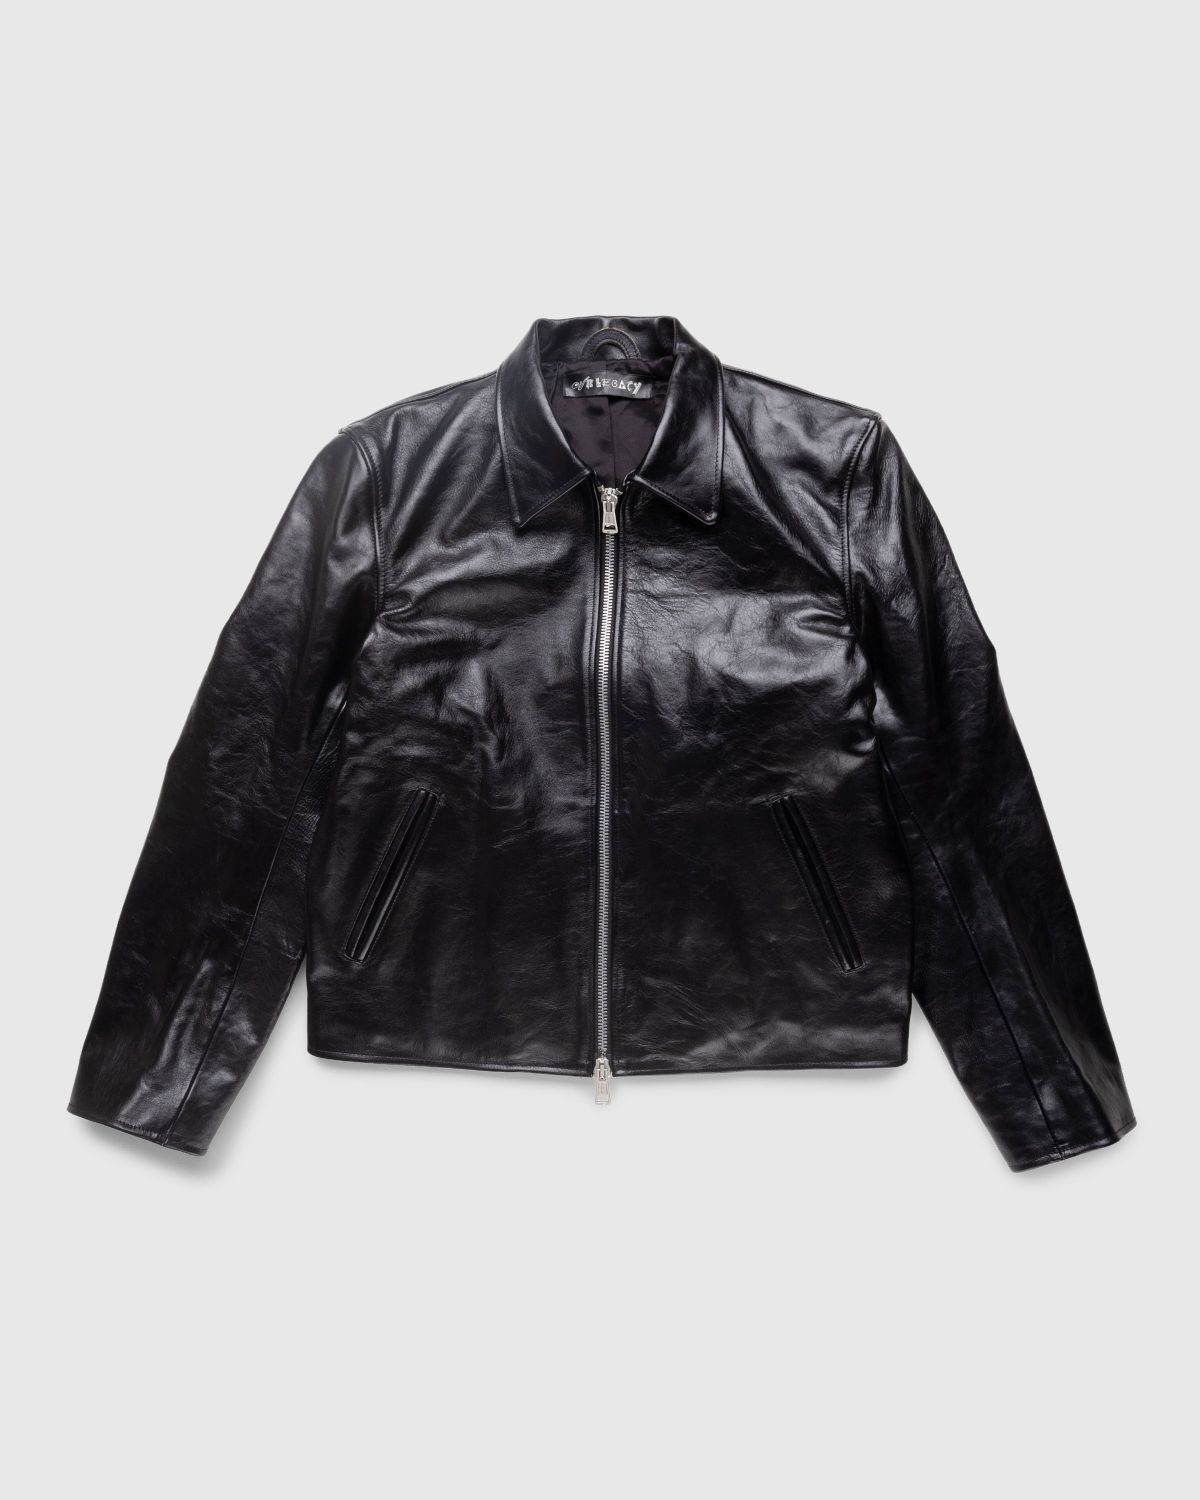 Our Legacy – Mini Jacket Top Dyed Black Leather | Highsnobiety Shop